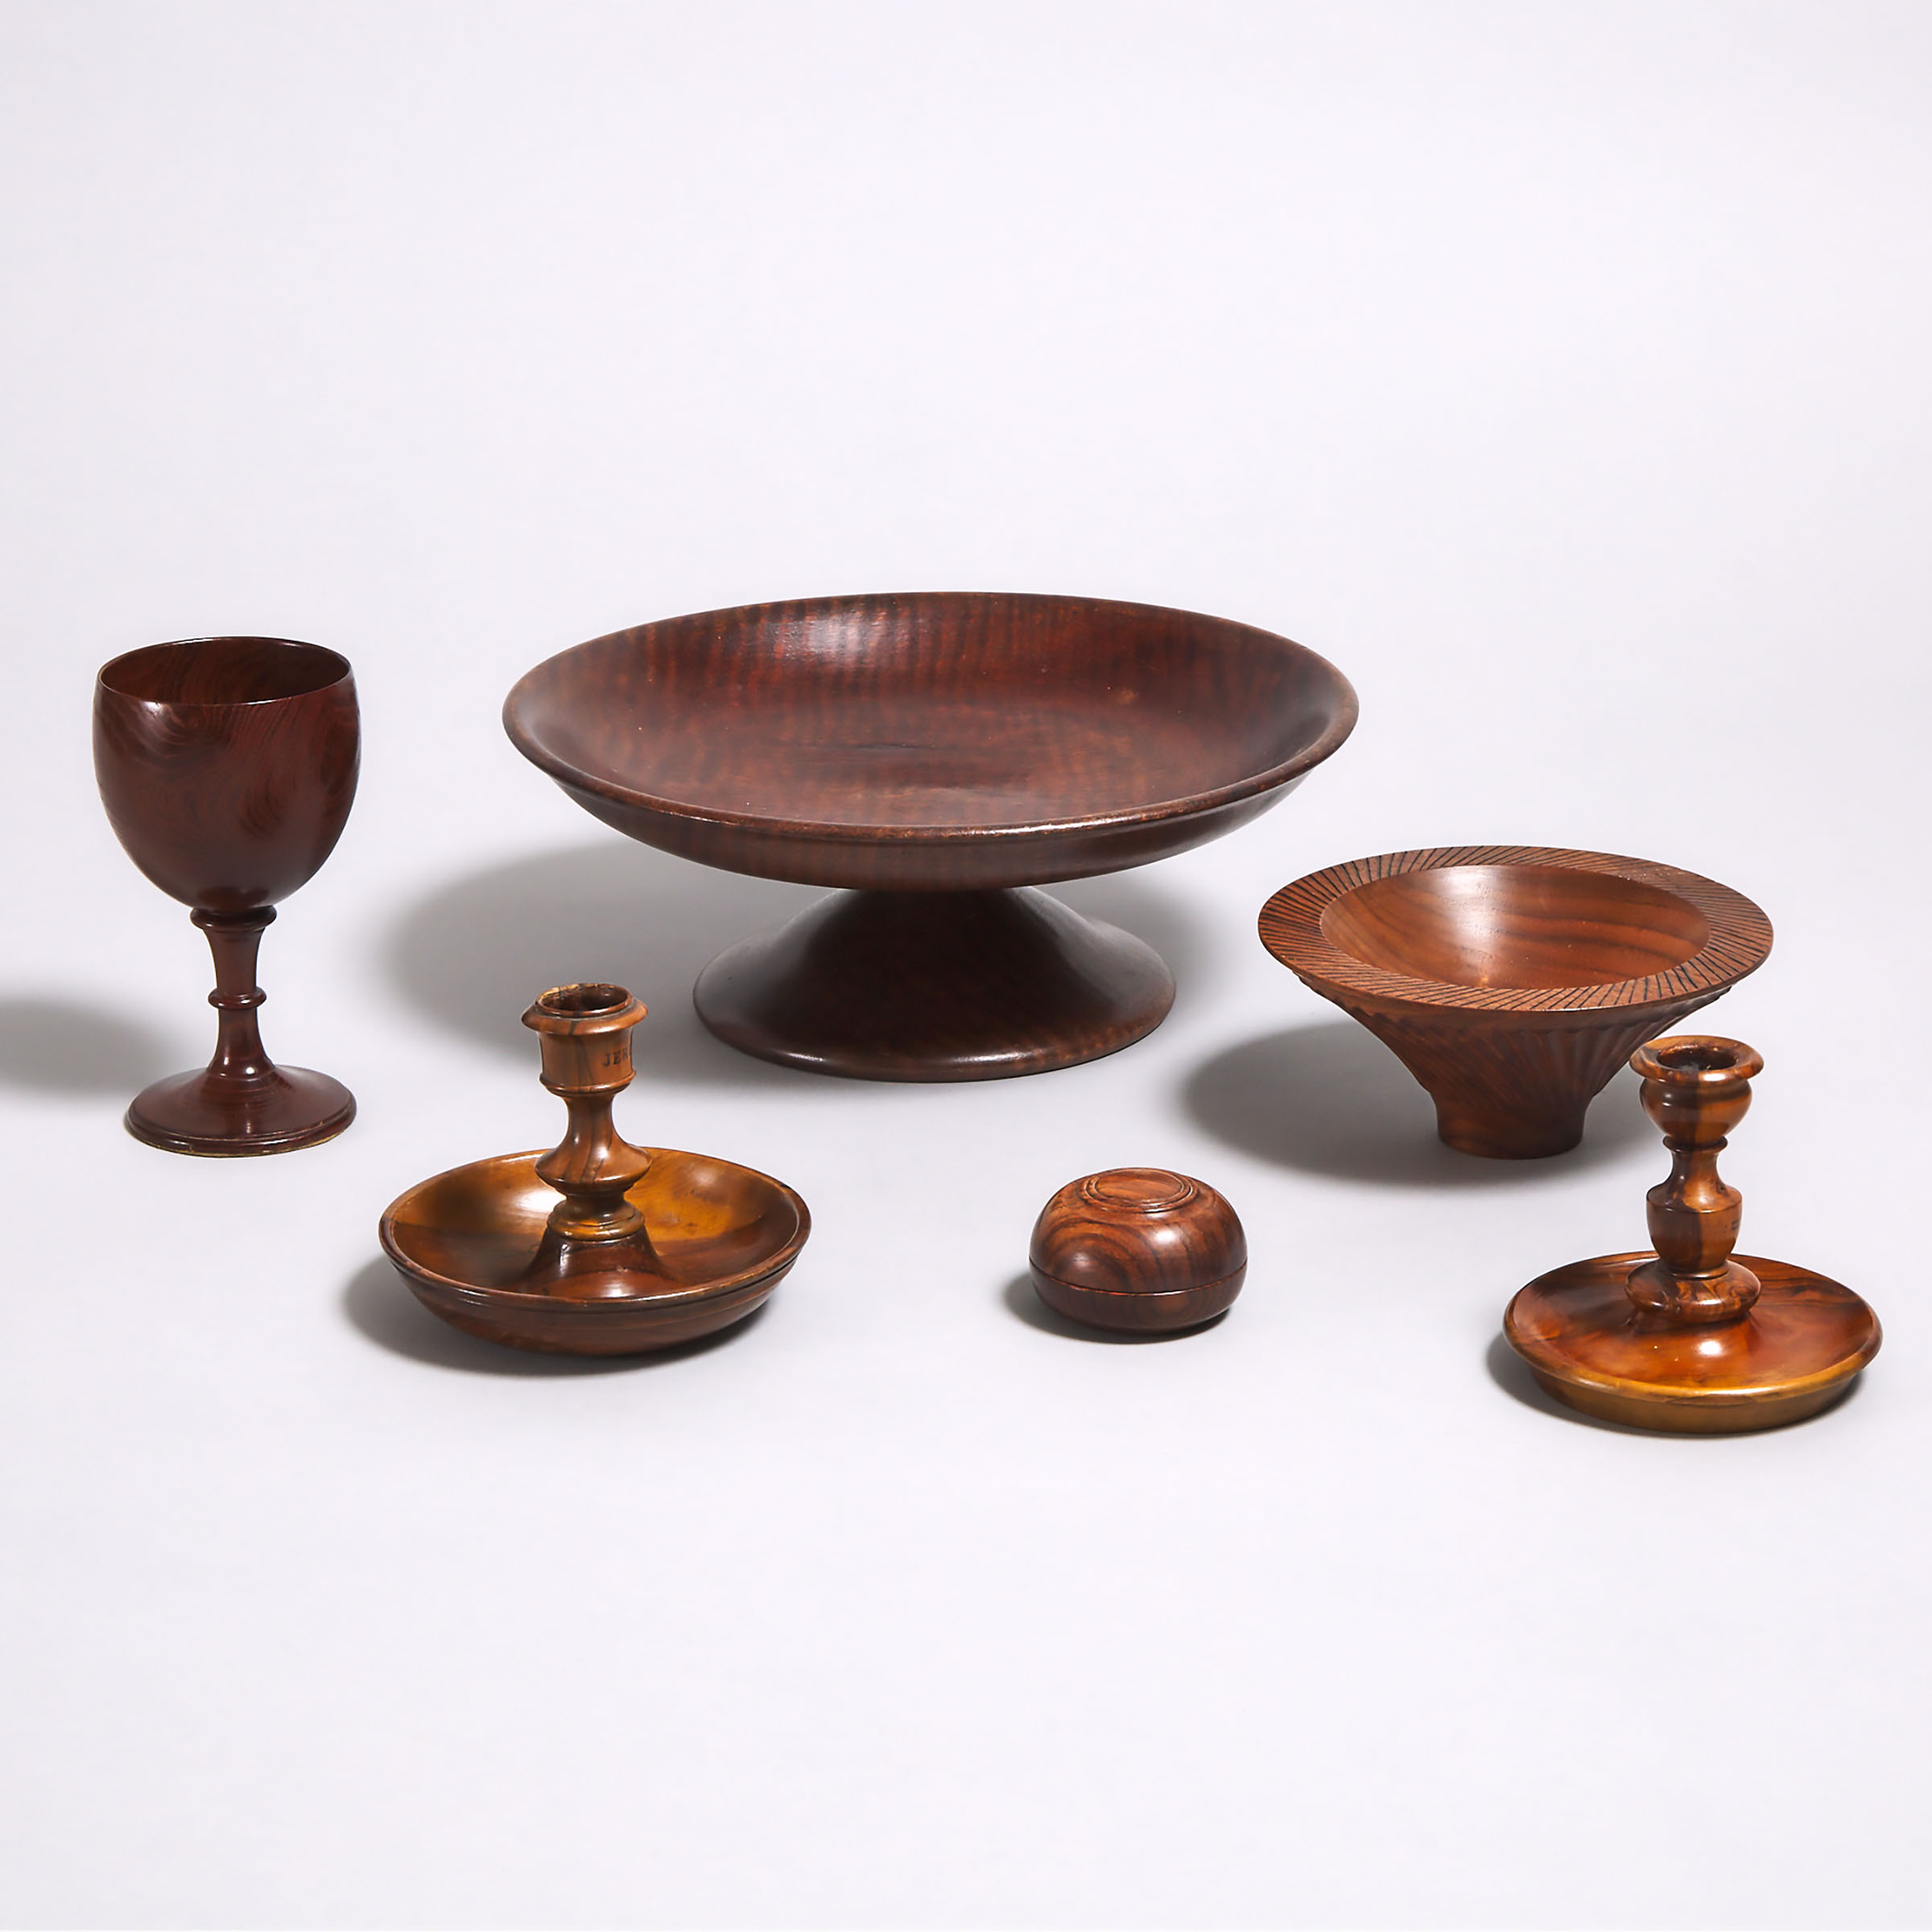 Five Pieces Turned Treen, 20th century